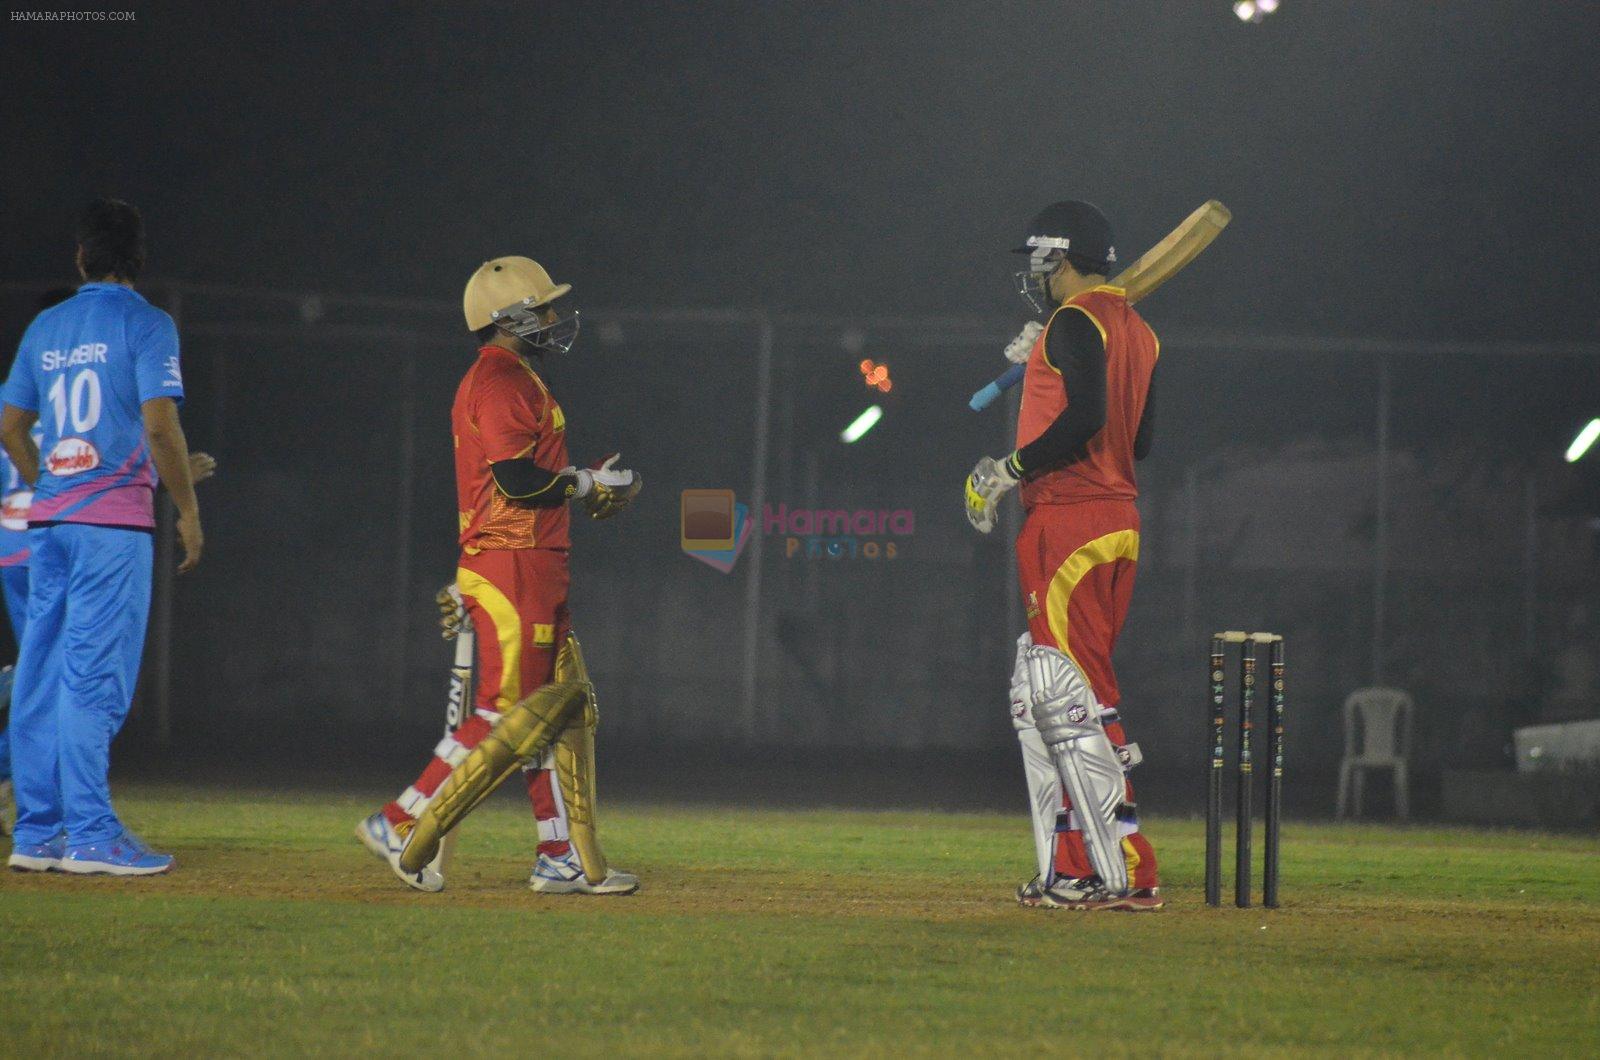 at CCL practise session in Mumbai on 5th Jan 2015